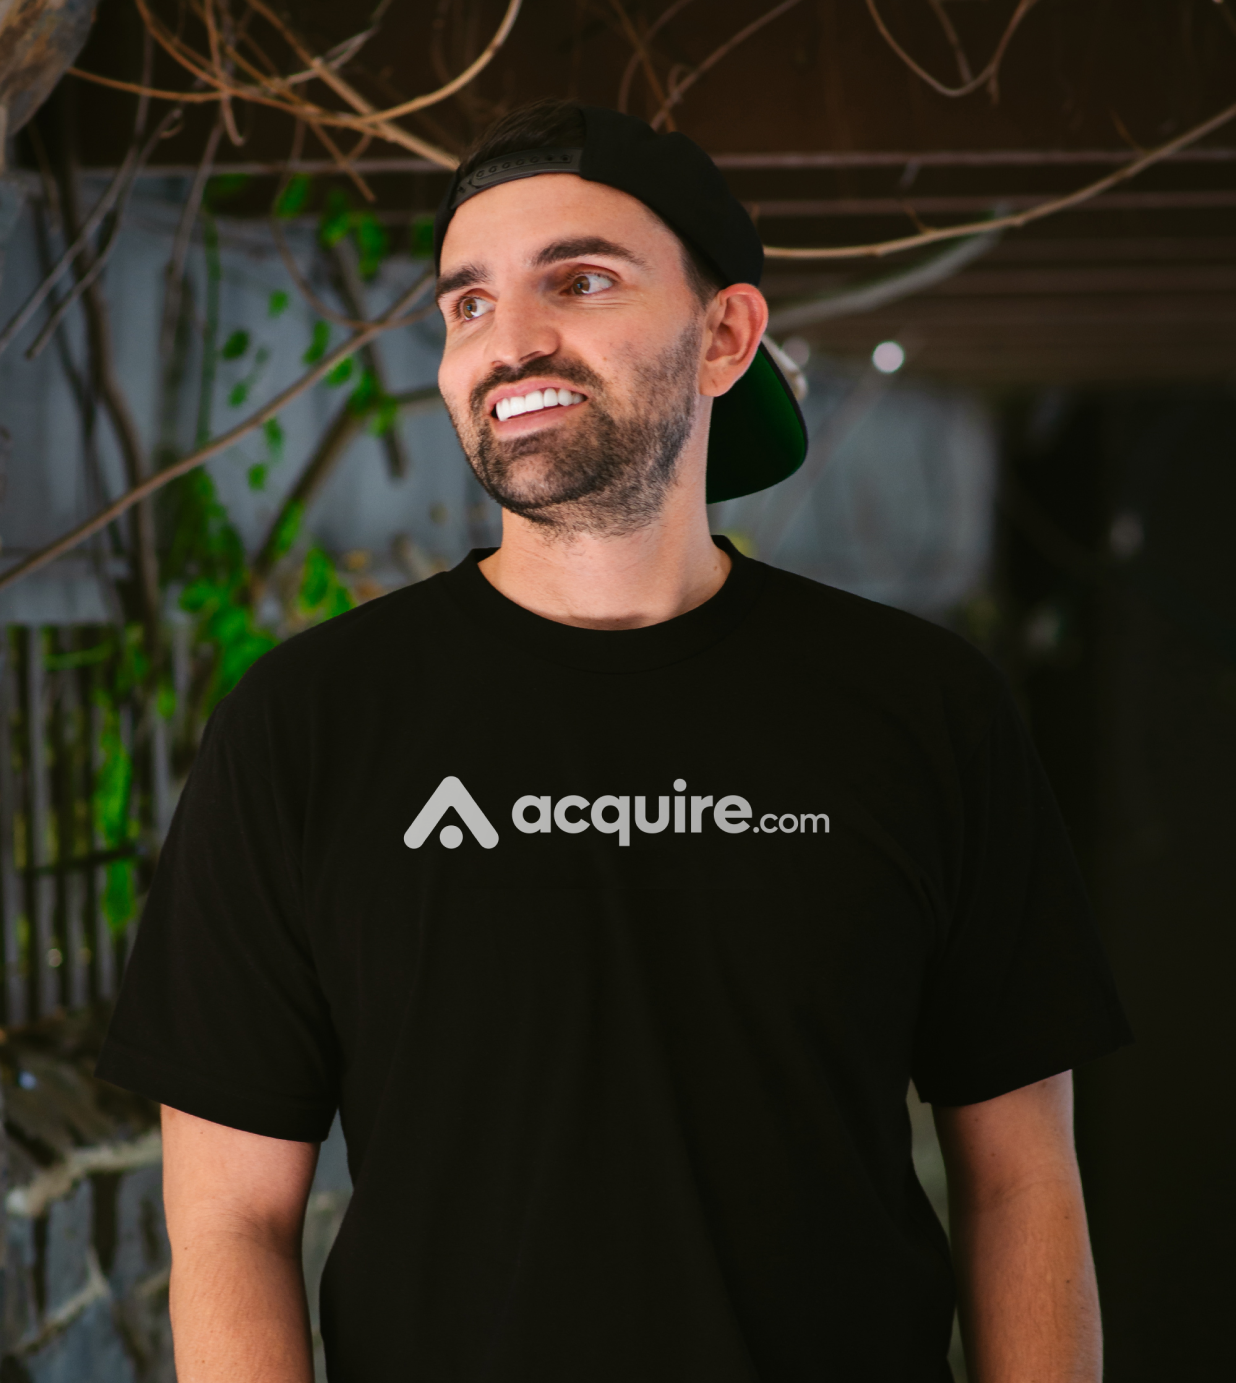 About Us | Acquire.com